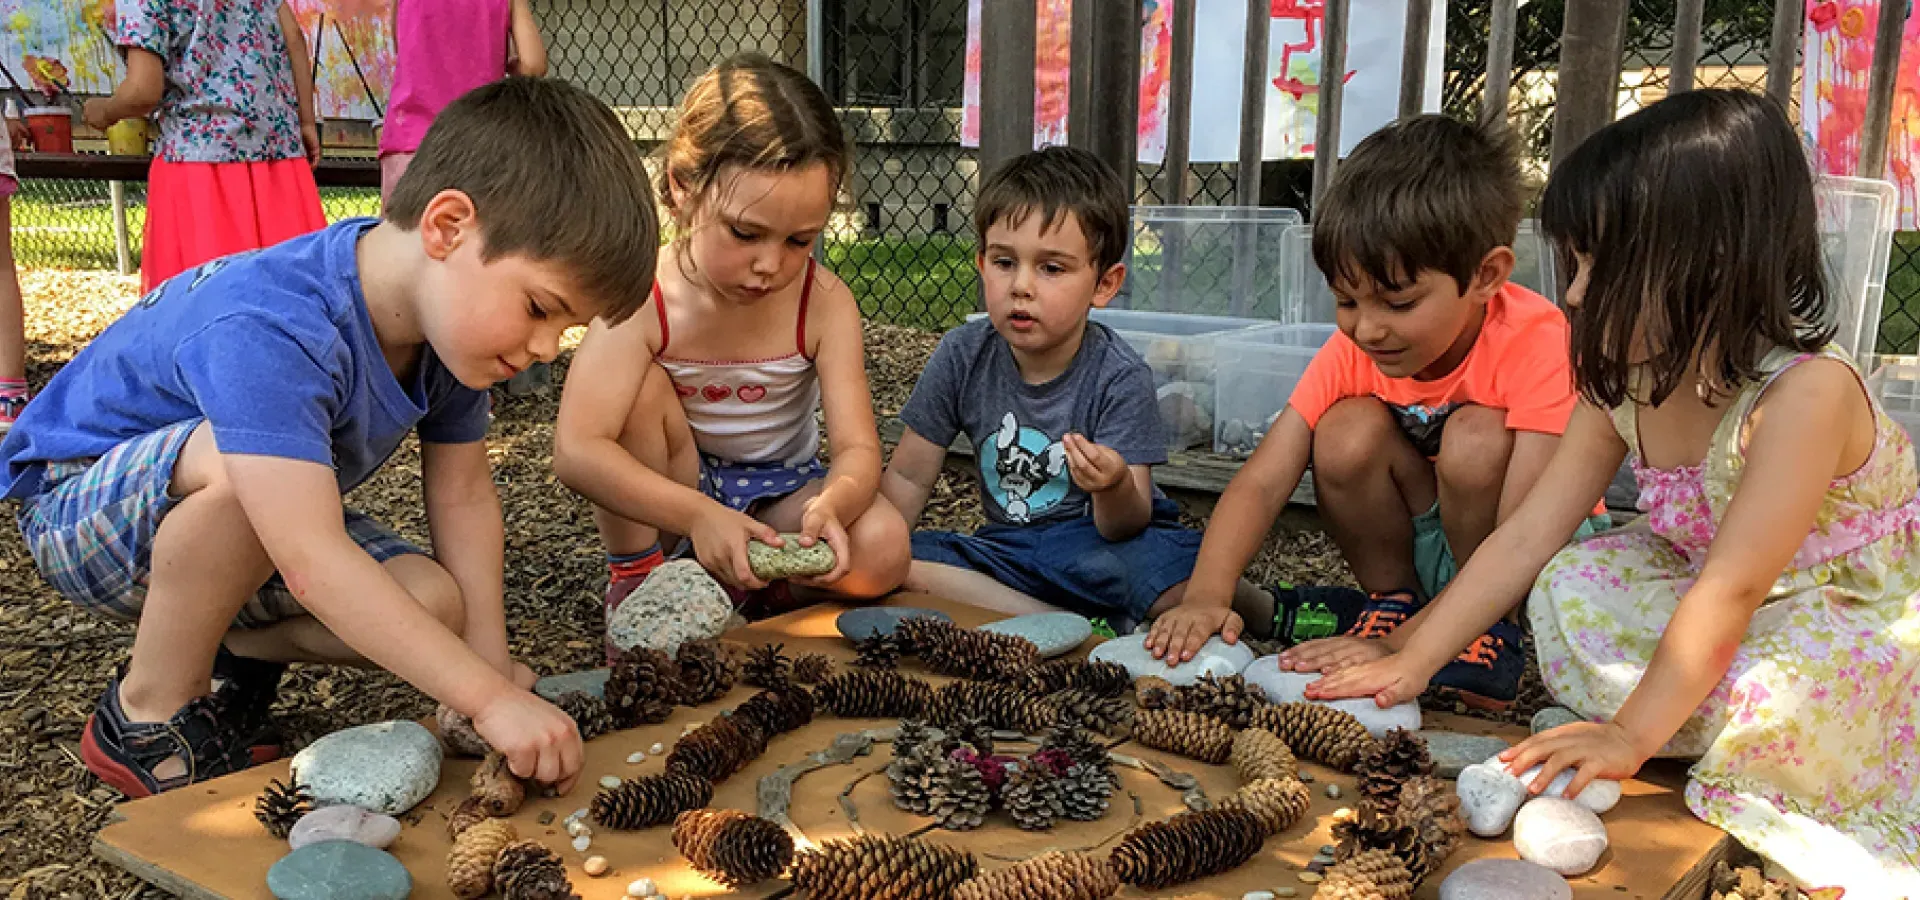 Group of young children making art from pinecones